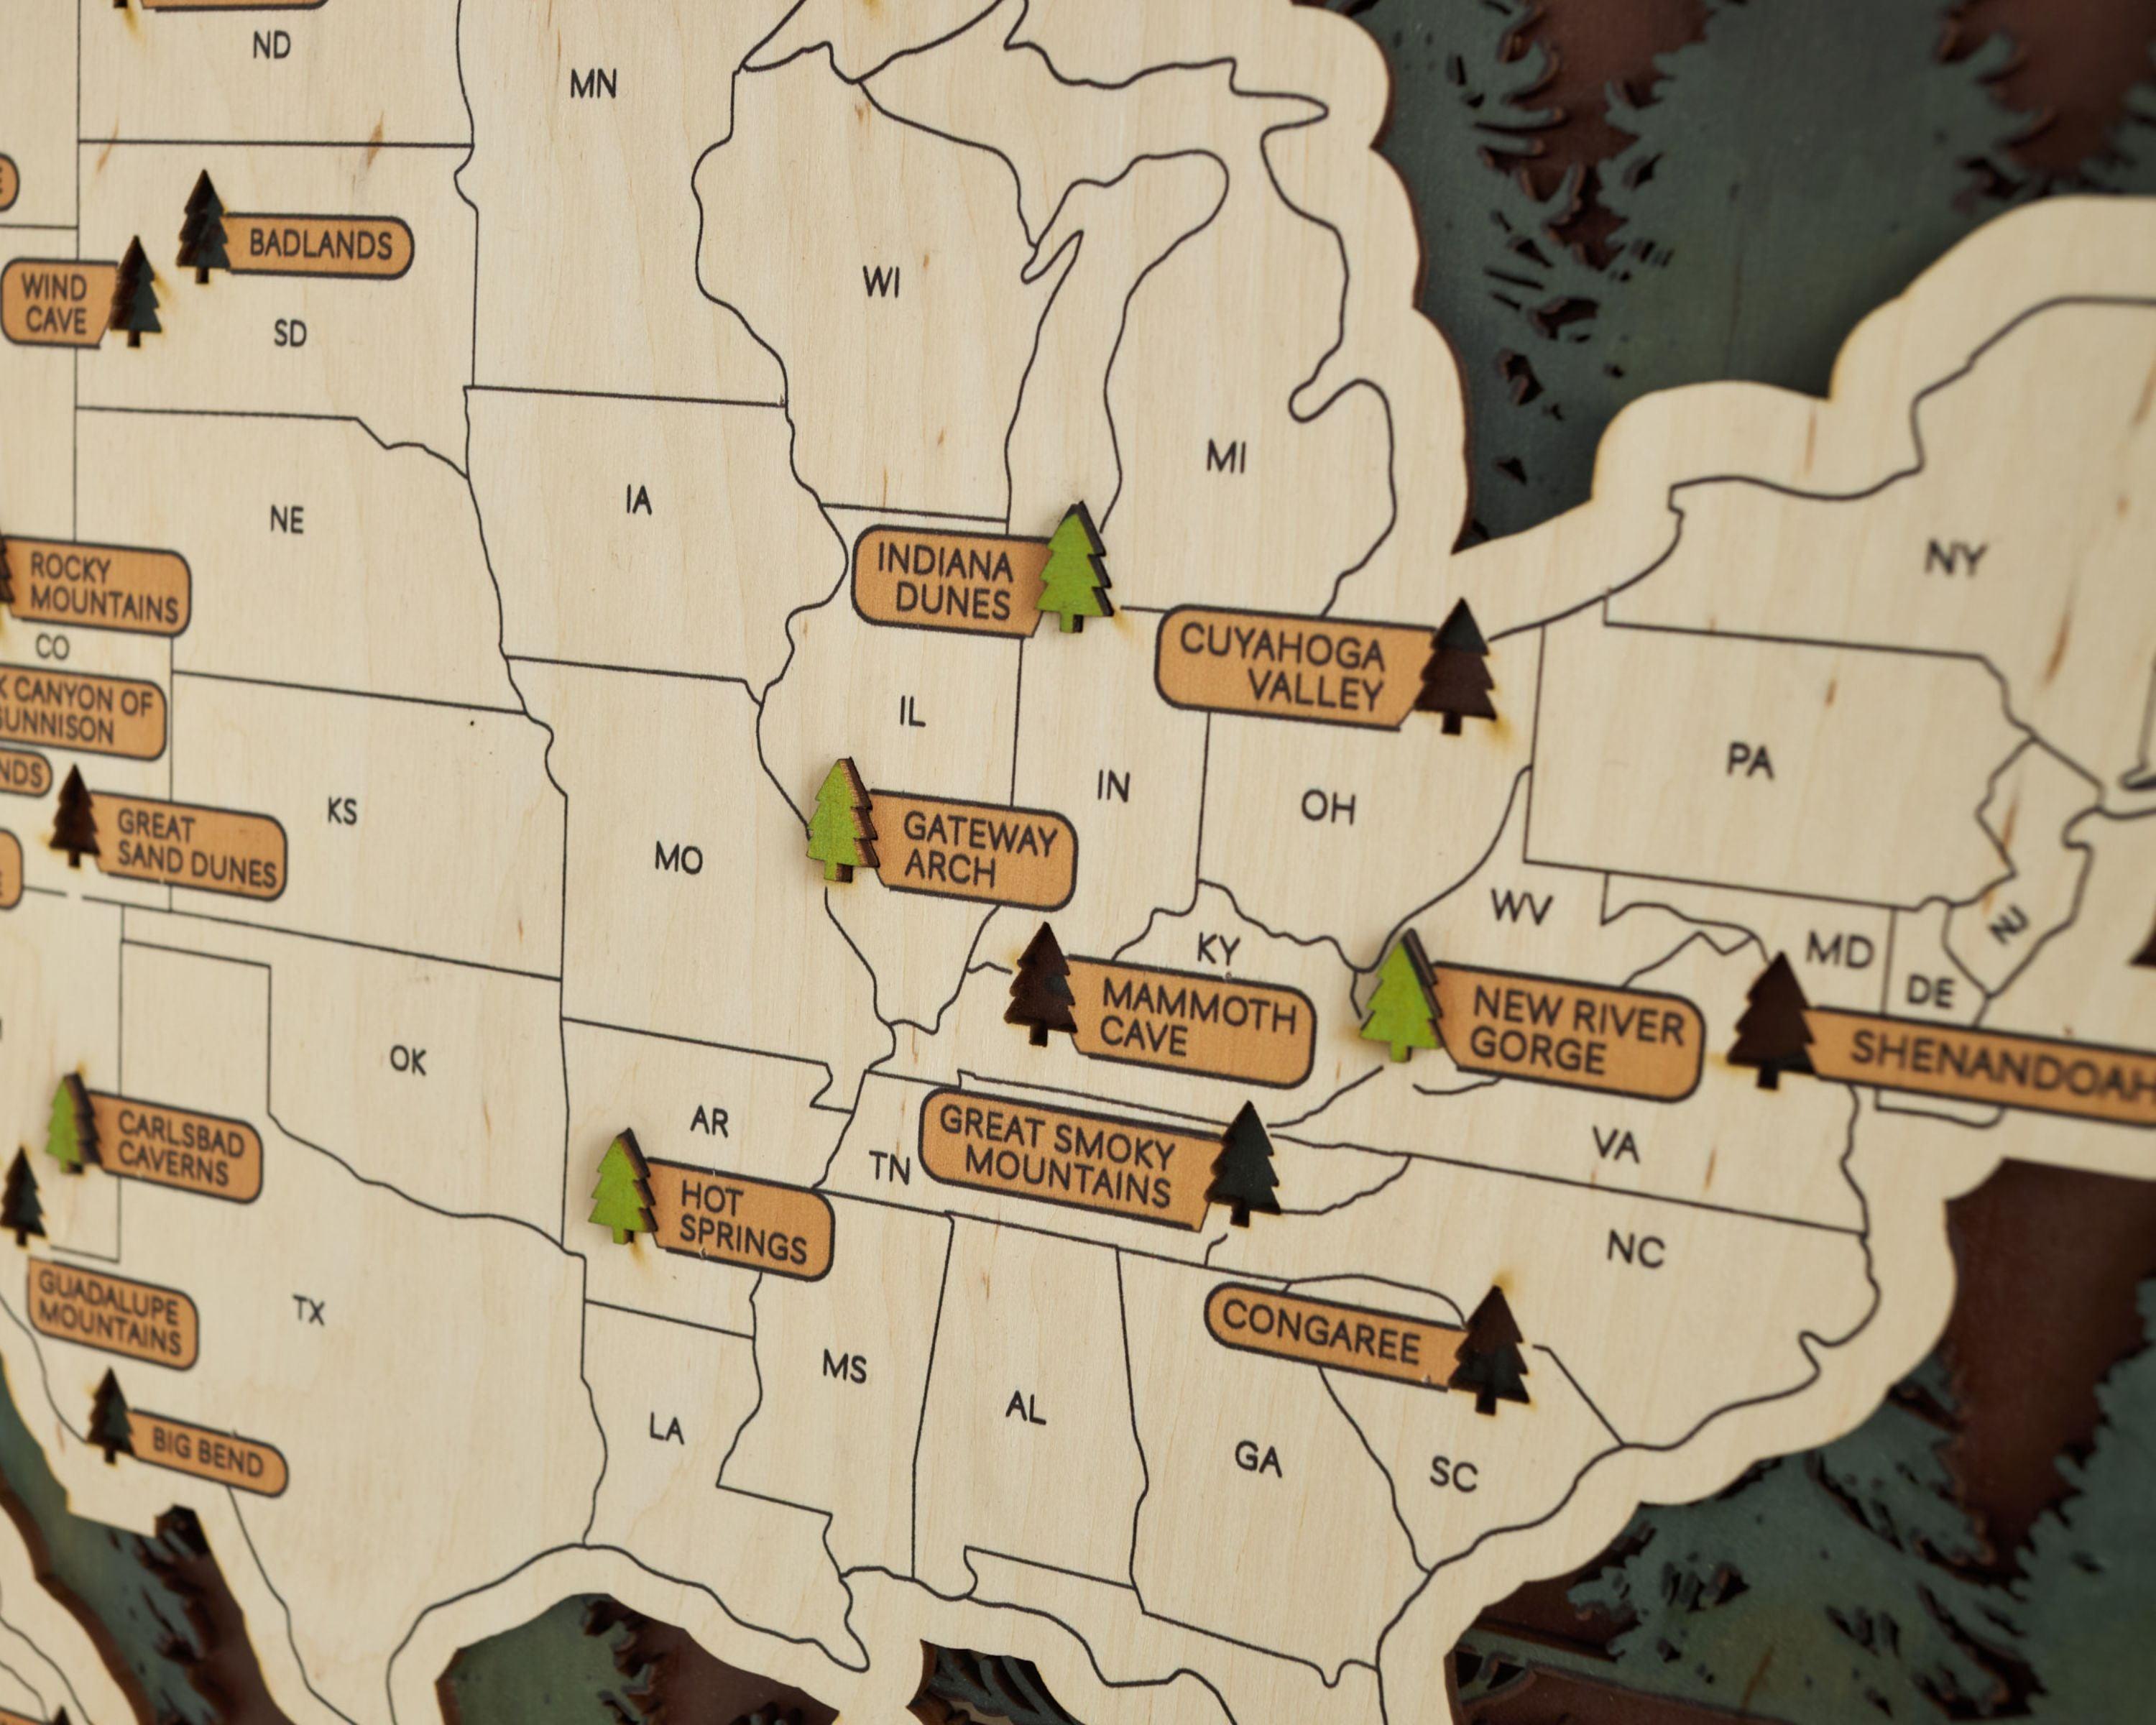 US 3D Wooden National Parks Travel Map With Trees To Record Park Visits (1 Design) - Lemap